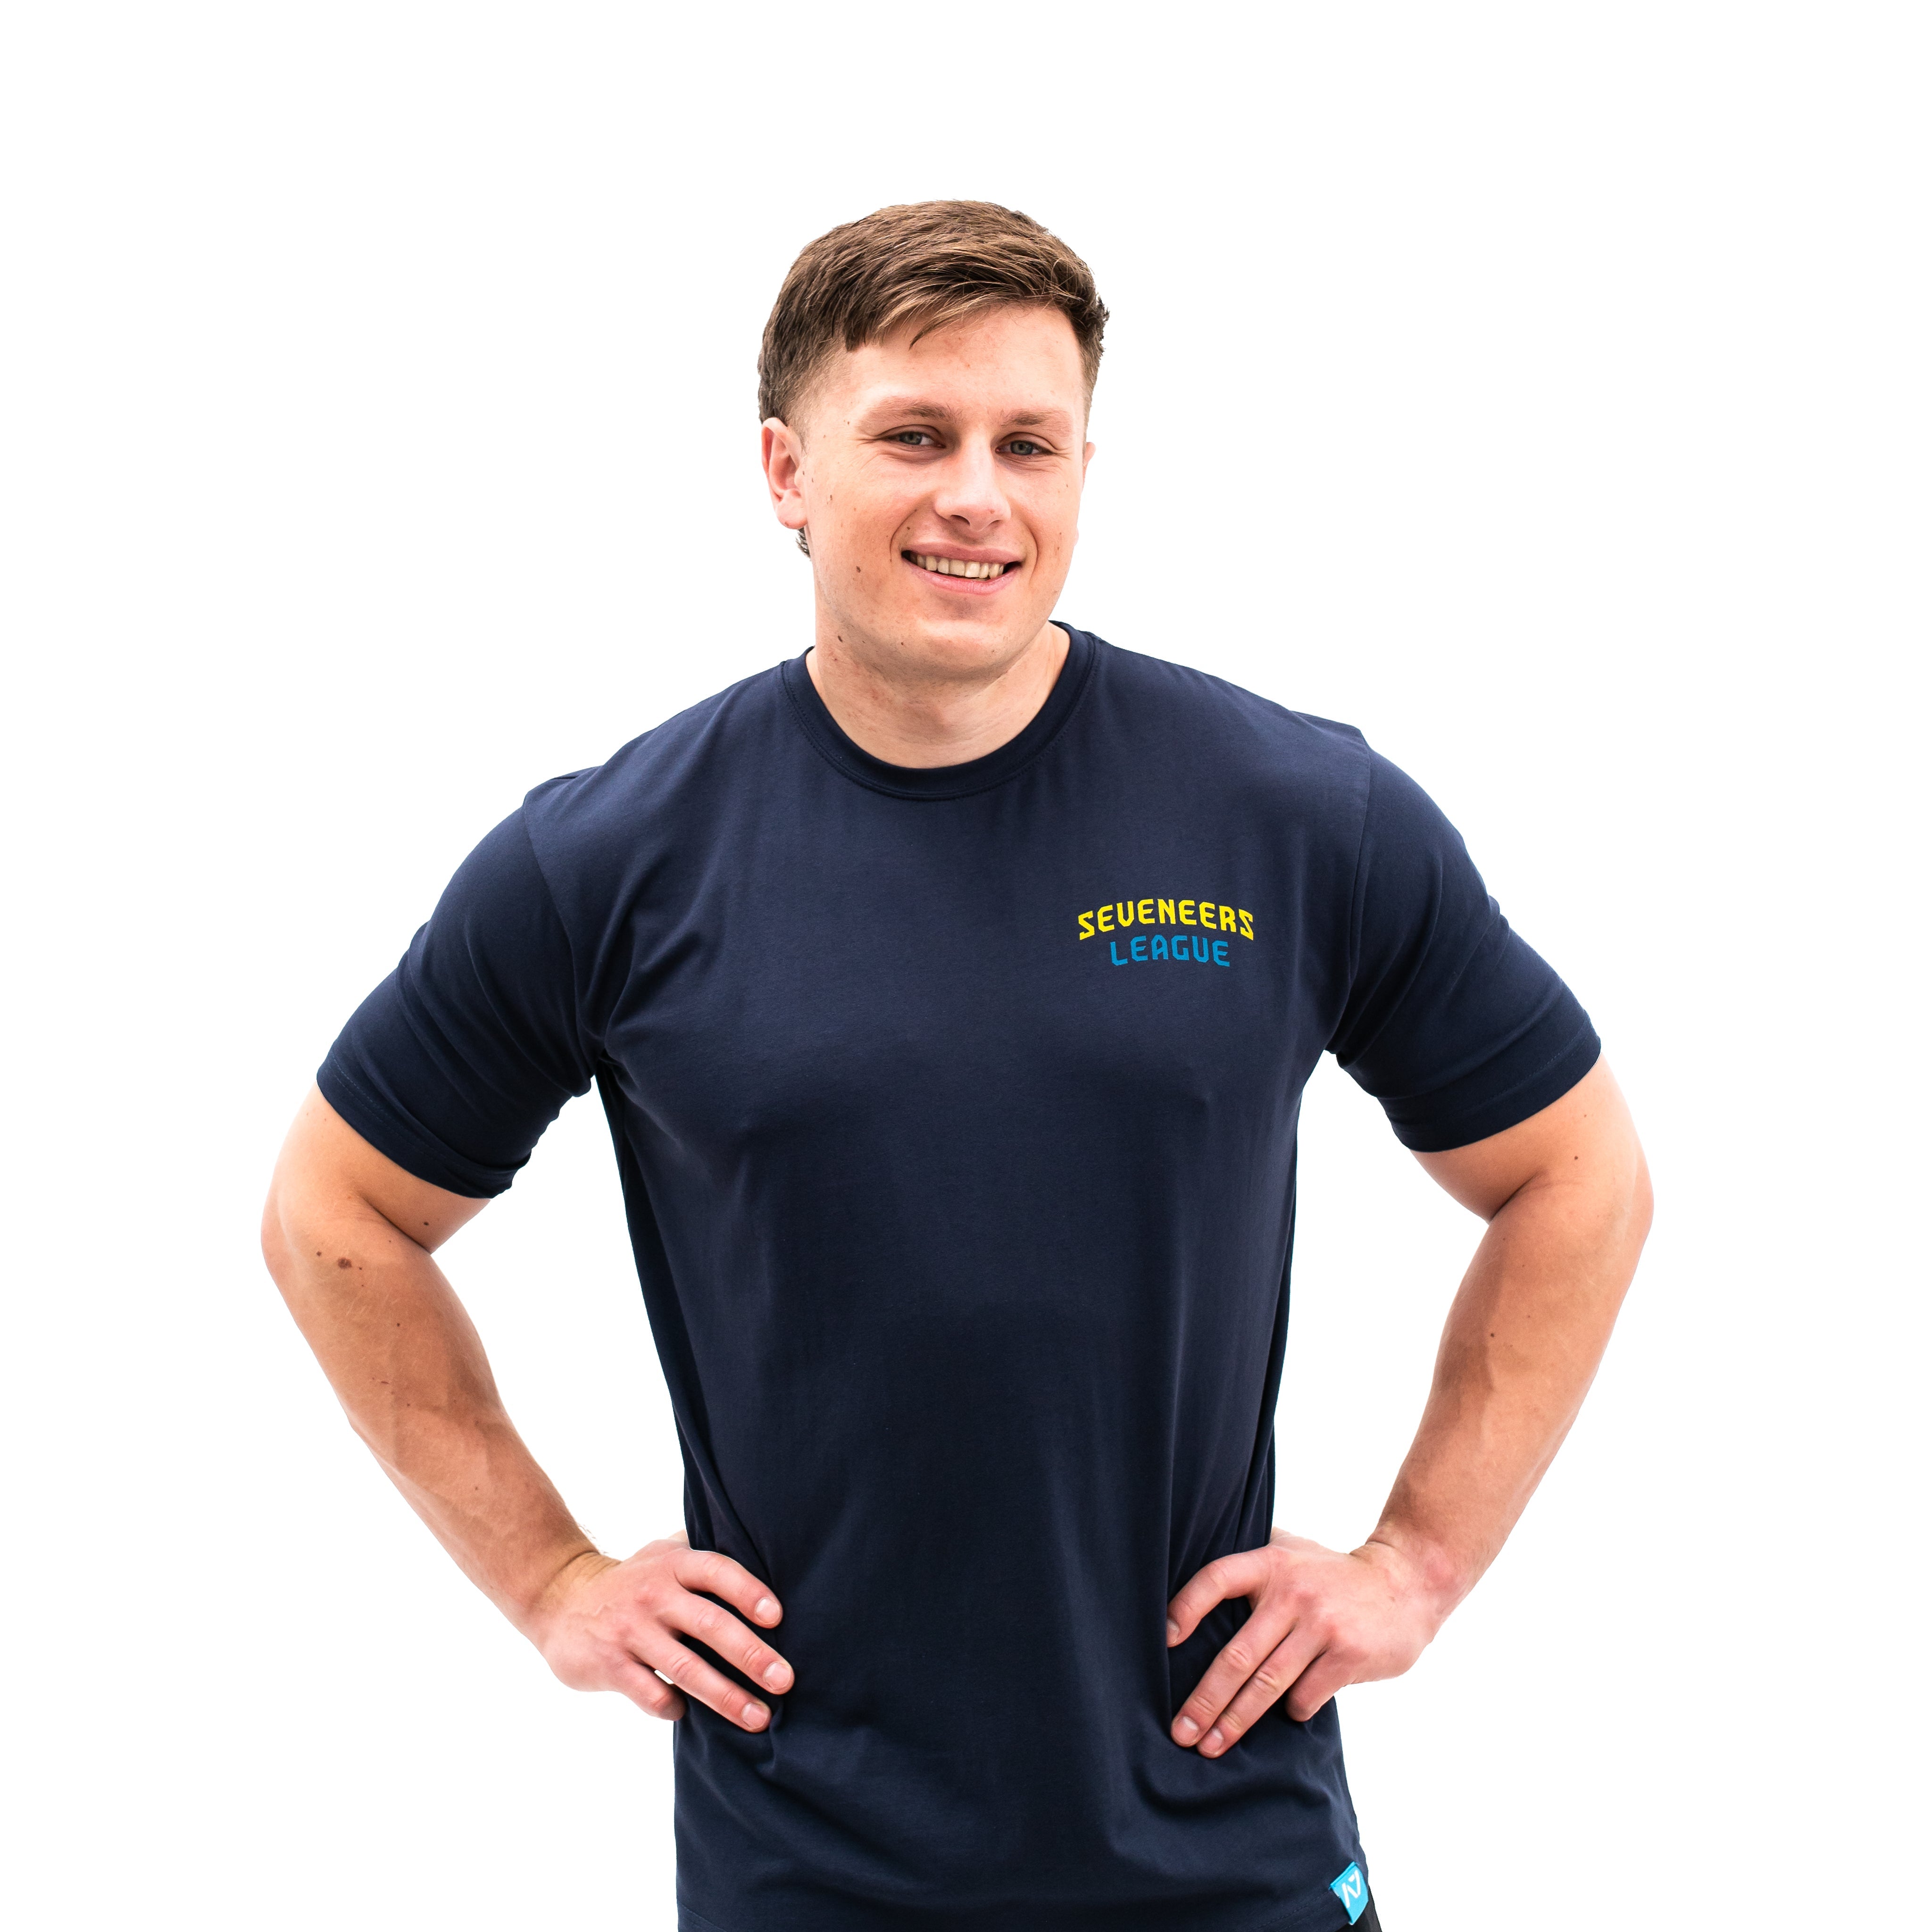 The Seveneers League - we demand greatness from life and never stop progressing towards out goals! An A7 shirt without the Bar Grip, but still a poppy, colourful design to wear for workouts or casual wear. Non bar grip shirts from A7 are a great gift for powerlifters or for travel to a meet or competition. Seveneers Bar Grip available from A7 UK to ship to UK.